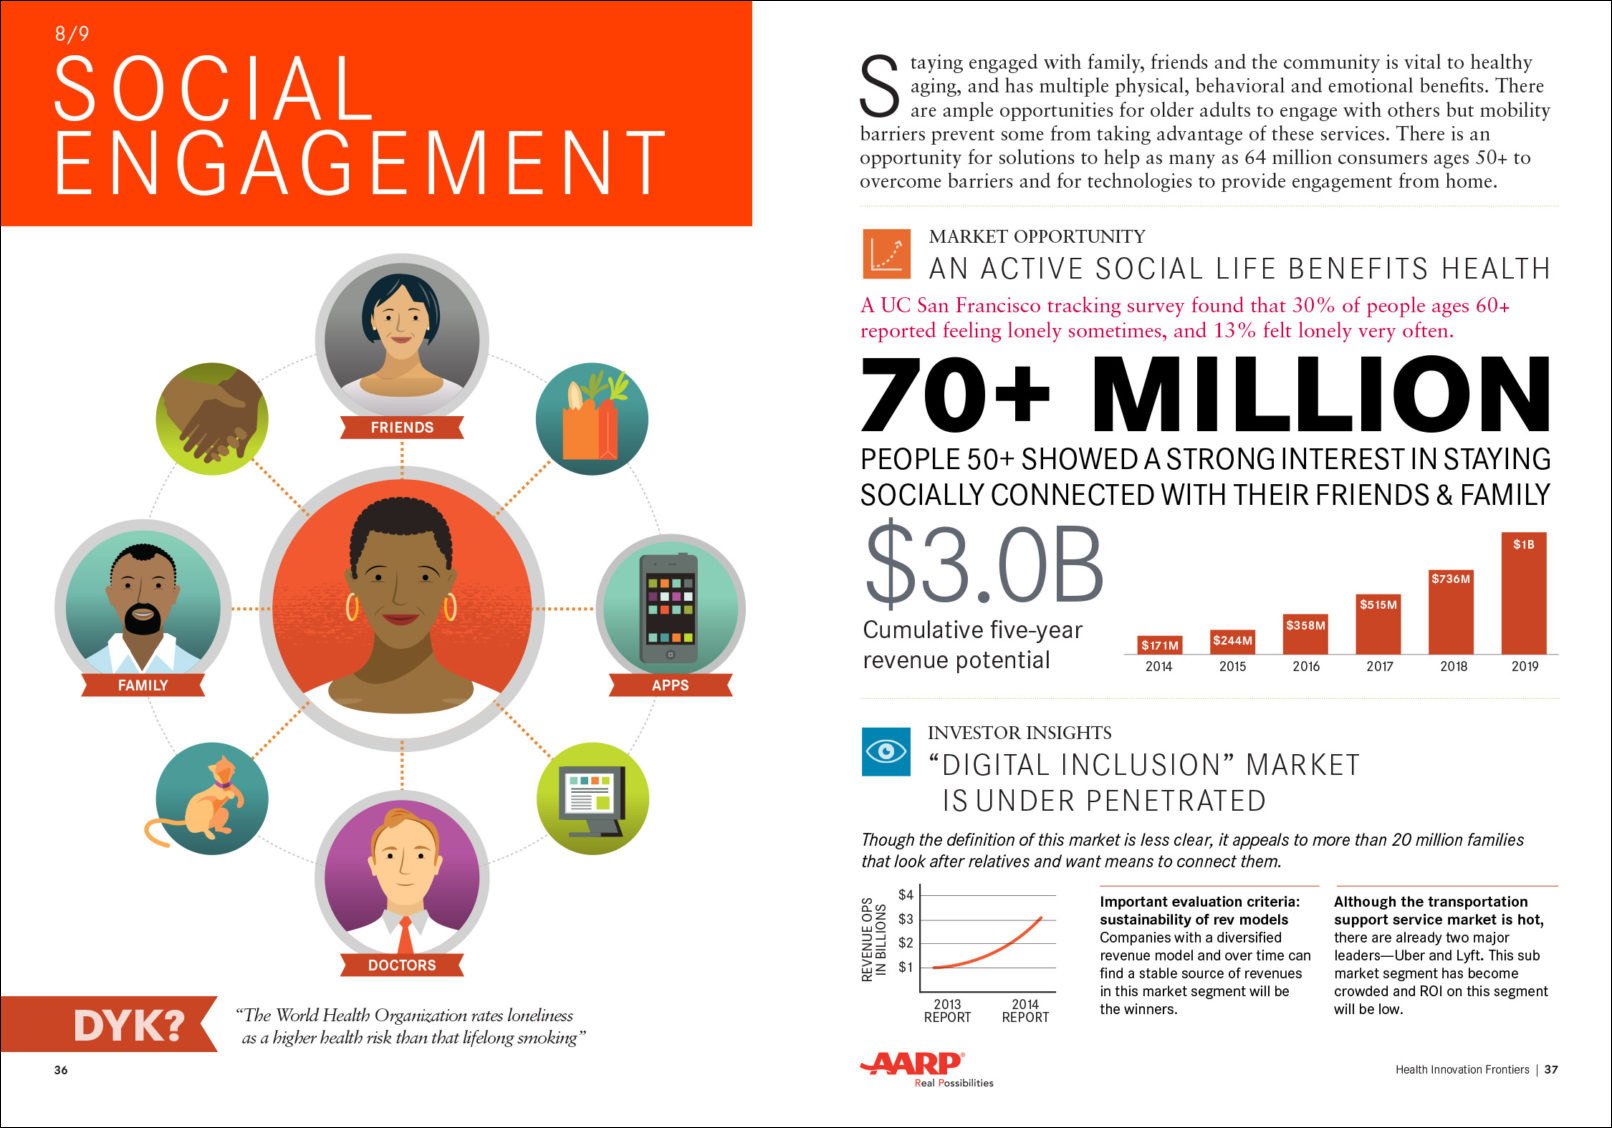 Our Health Innovation Frontiers report for AARP, full of data visualizations and illustrations to communicate how social engagement benefits physical, behavioral, and emotional health.